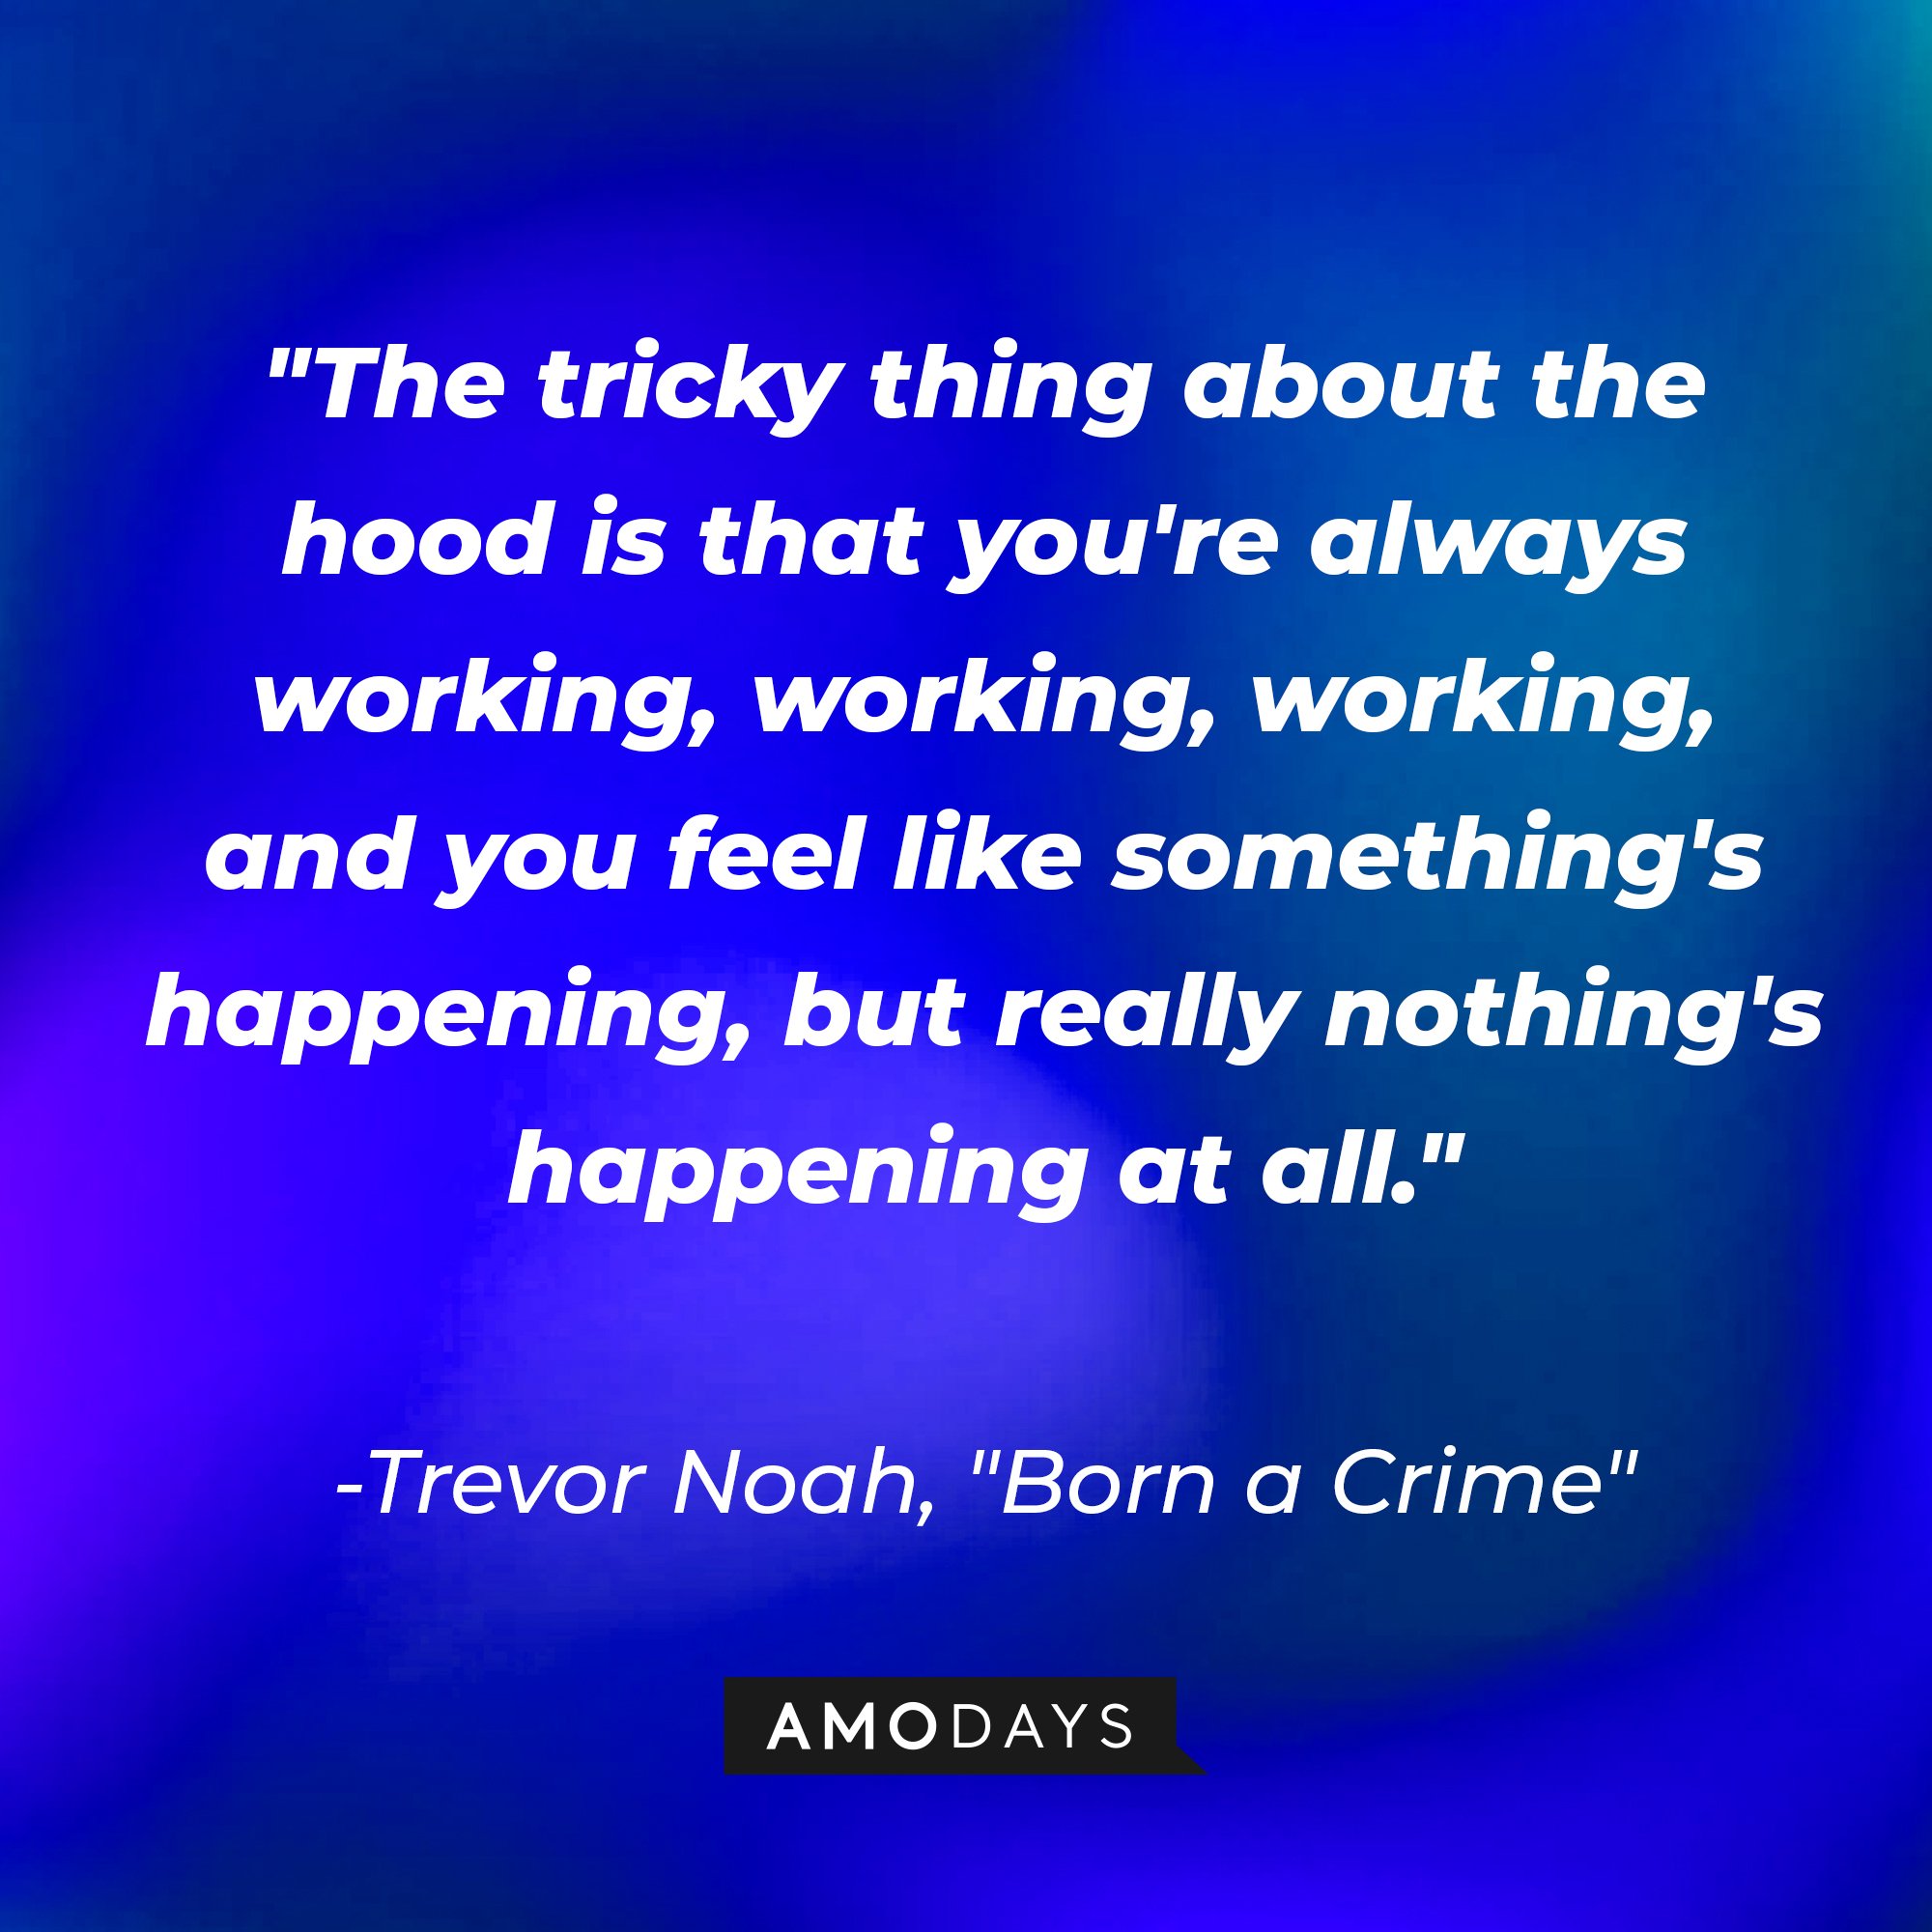 Trevor Noah's "Born a Crime" quote: "The tricky thing about the hood is that you're always working, working, working, and you feel like something's happening, but really nothing's happening at all." | Image: AmoDays